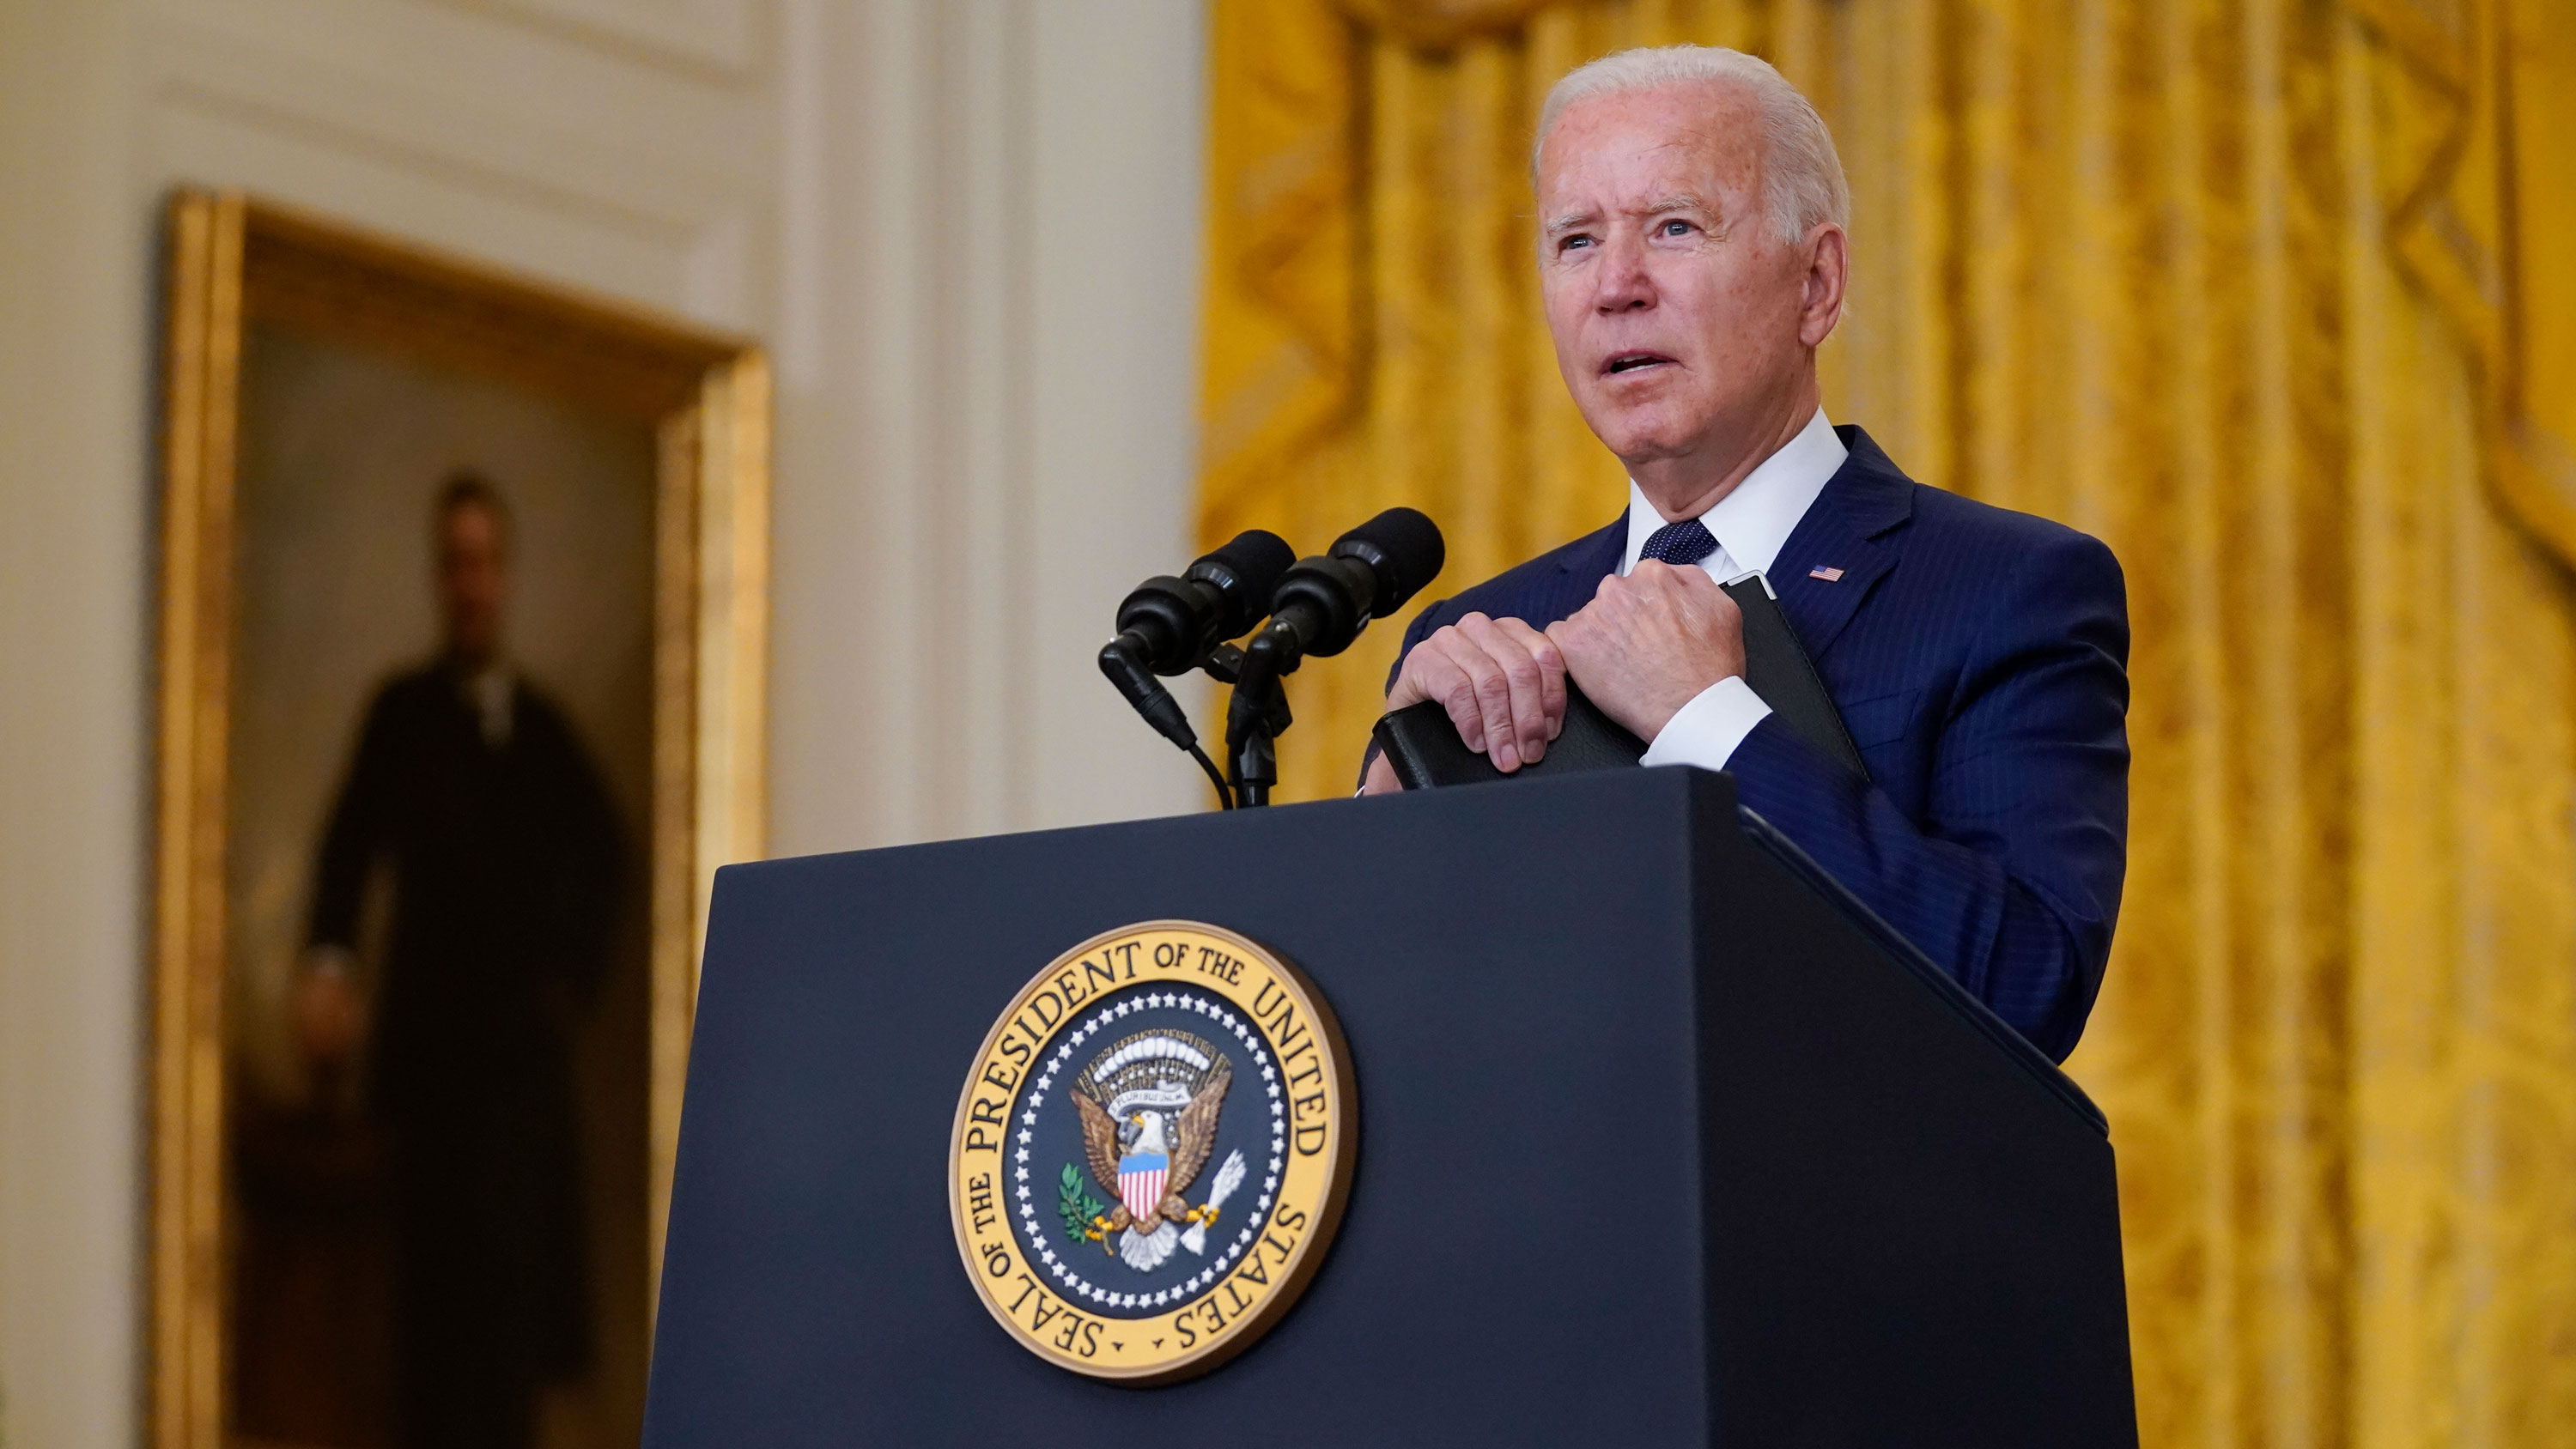 President Joe Biden answers questions from members of the media from the East Room of the White House on August 26 in Washington, DC.